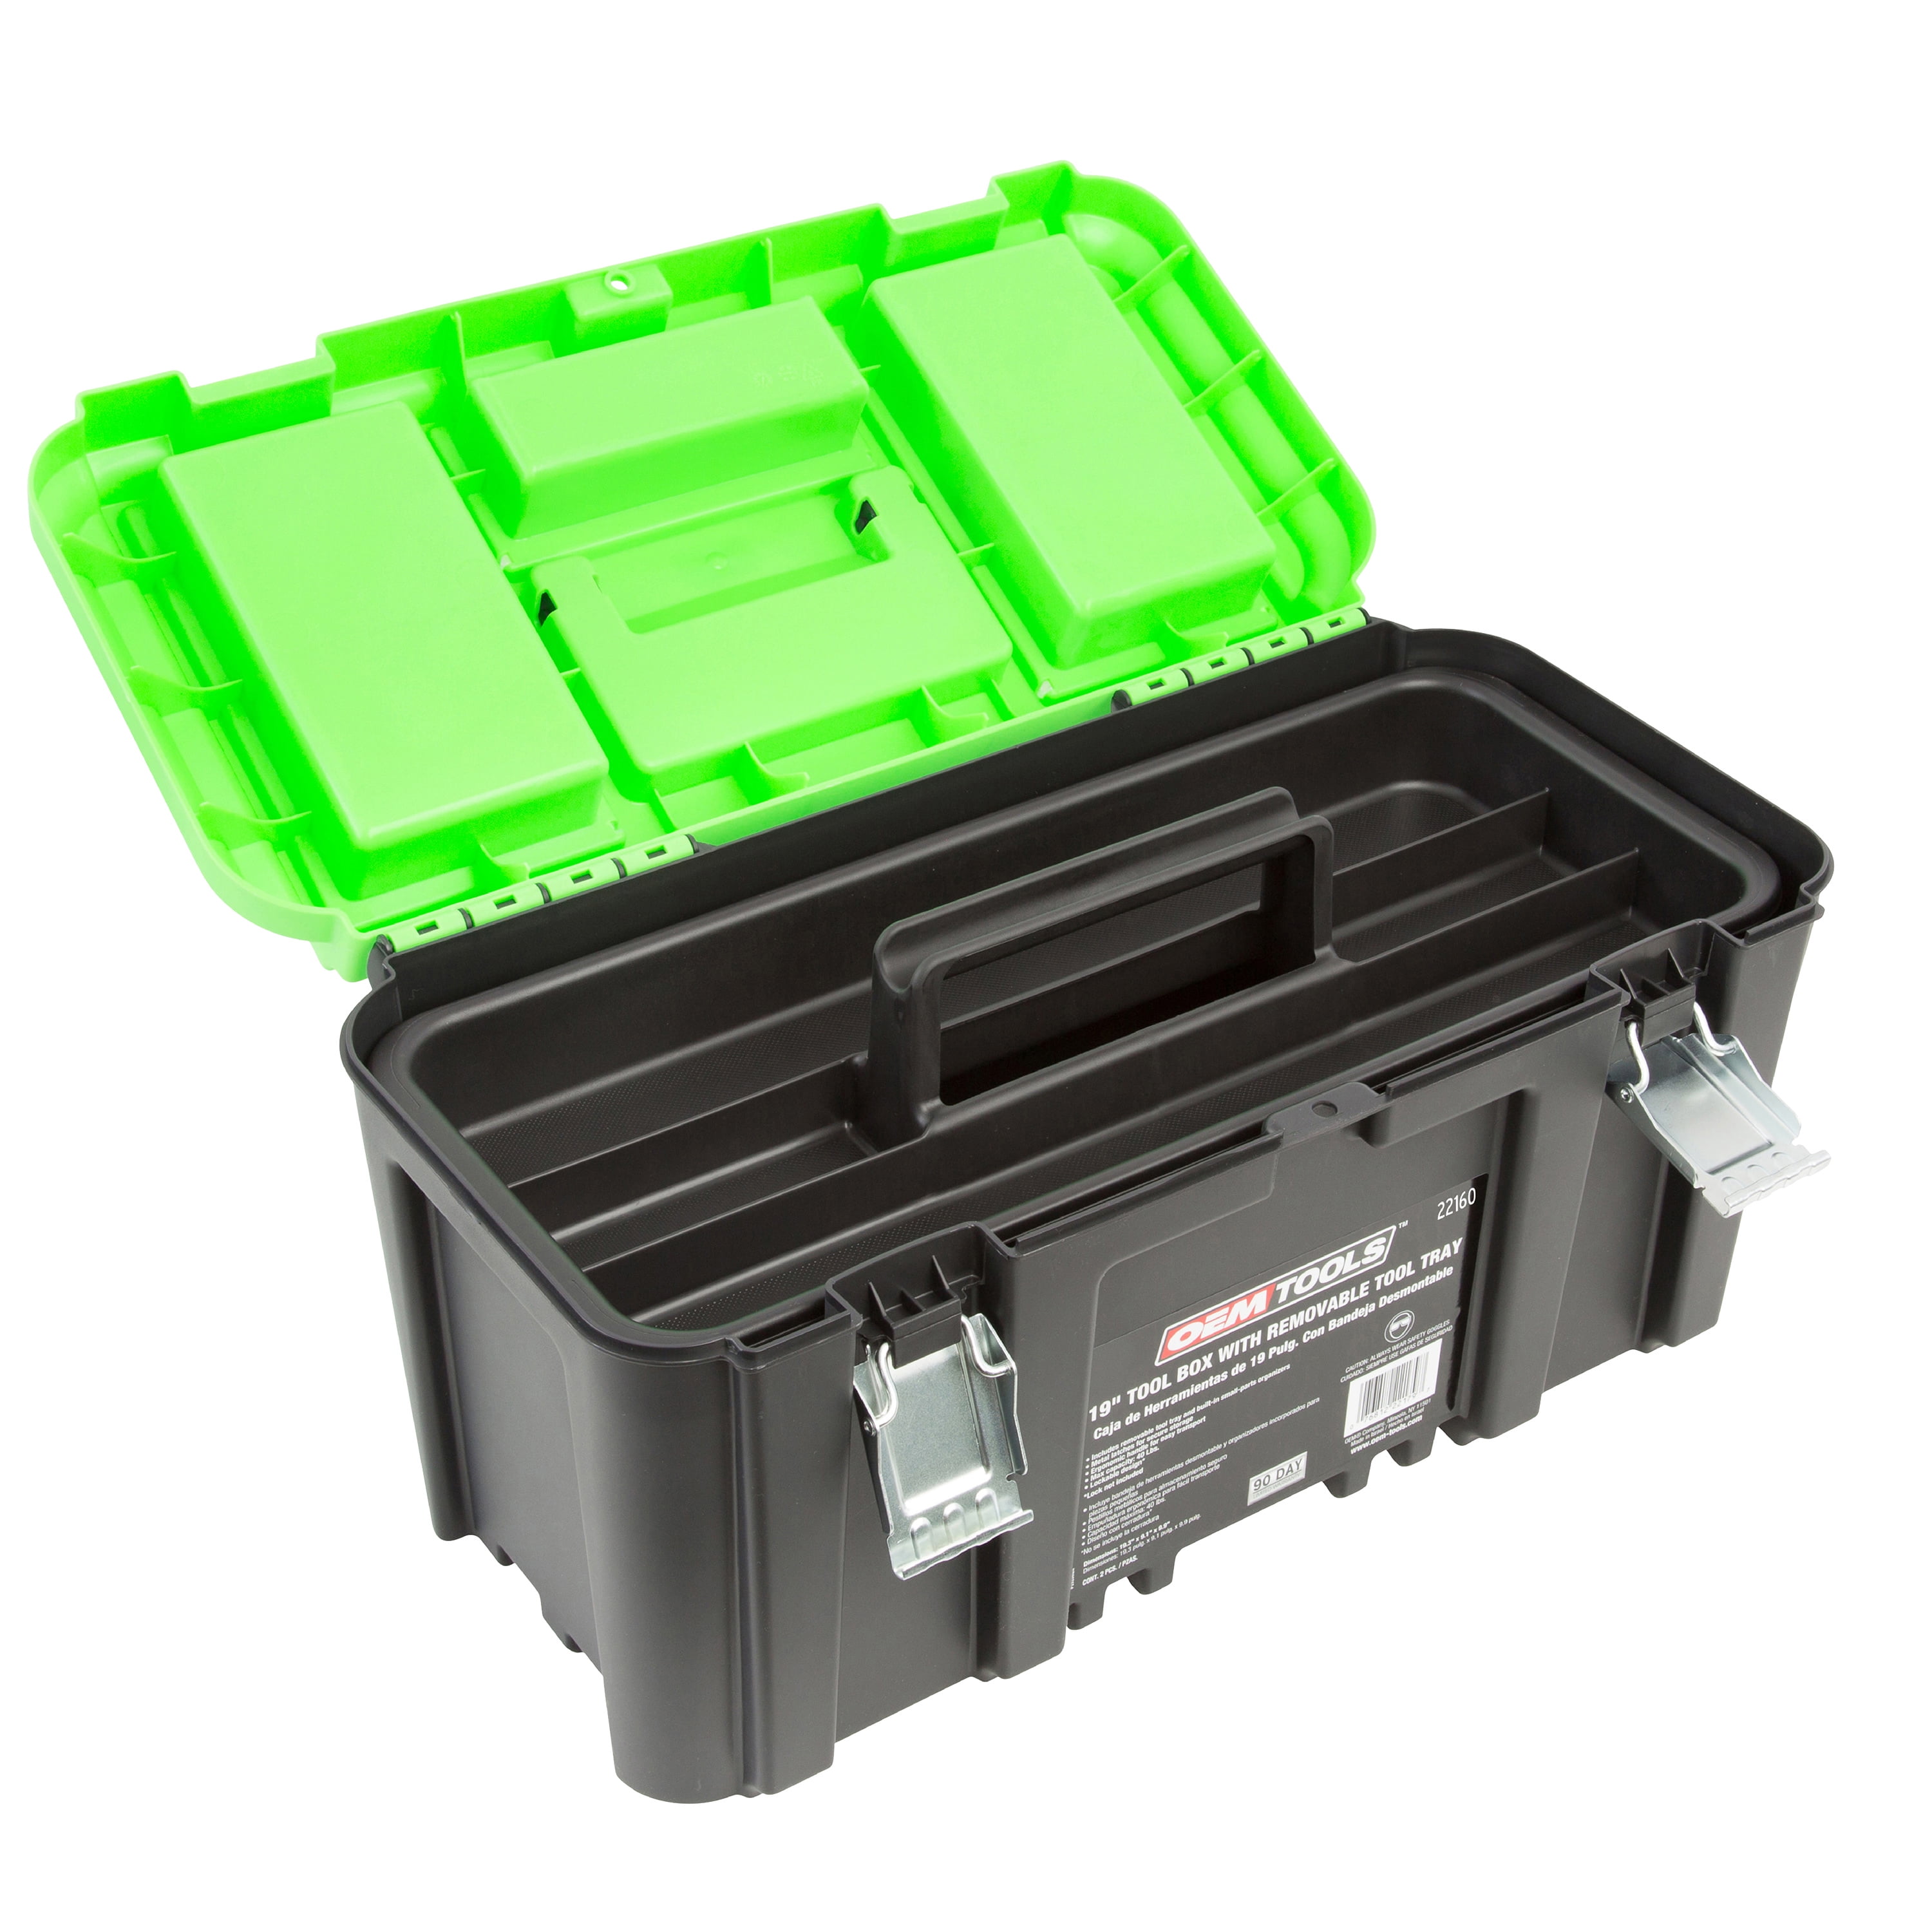 Rated up to 40 Lbs. Heavy Duty Tool Box with 2 Metal Latches OEMTOOLS 22160 19 Inch Tool Box with Removable Tool Tray Green Small Parts Organizer in Lid 